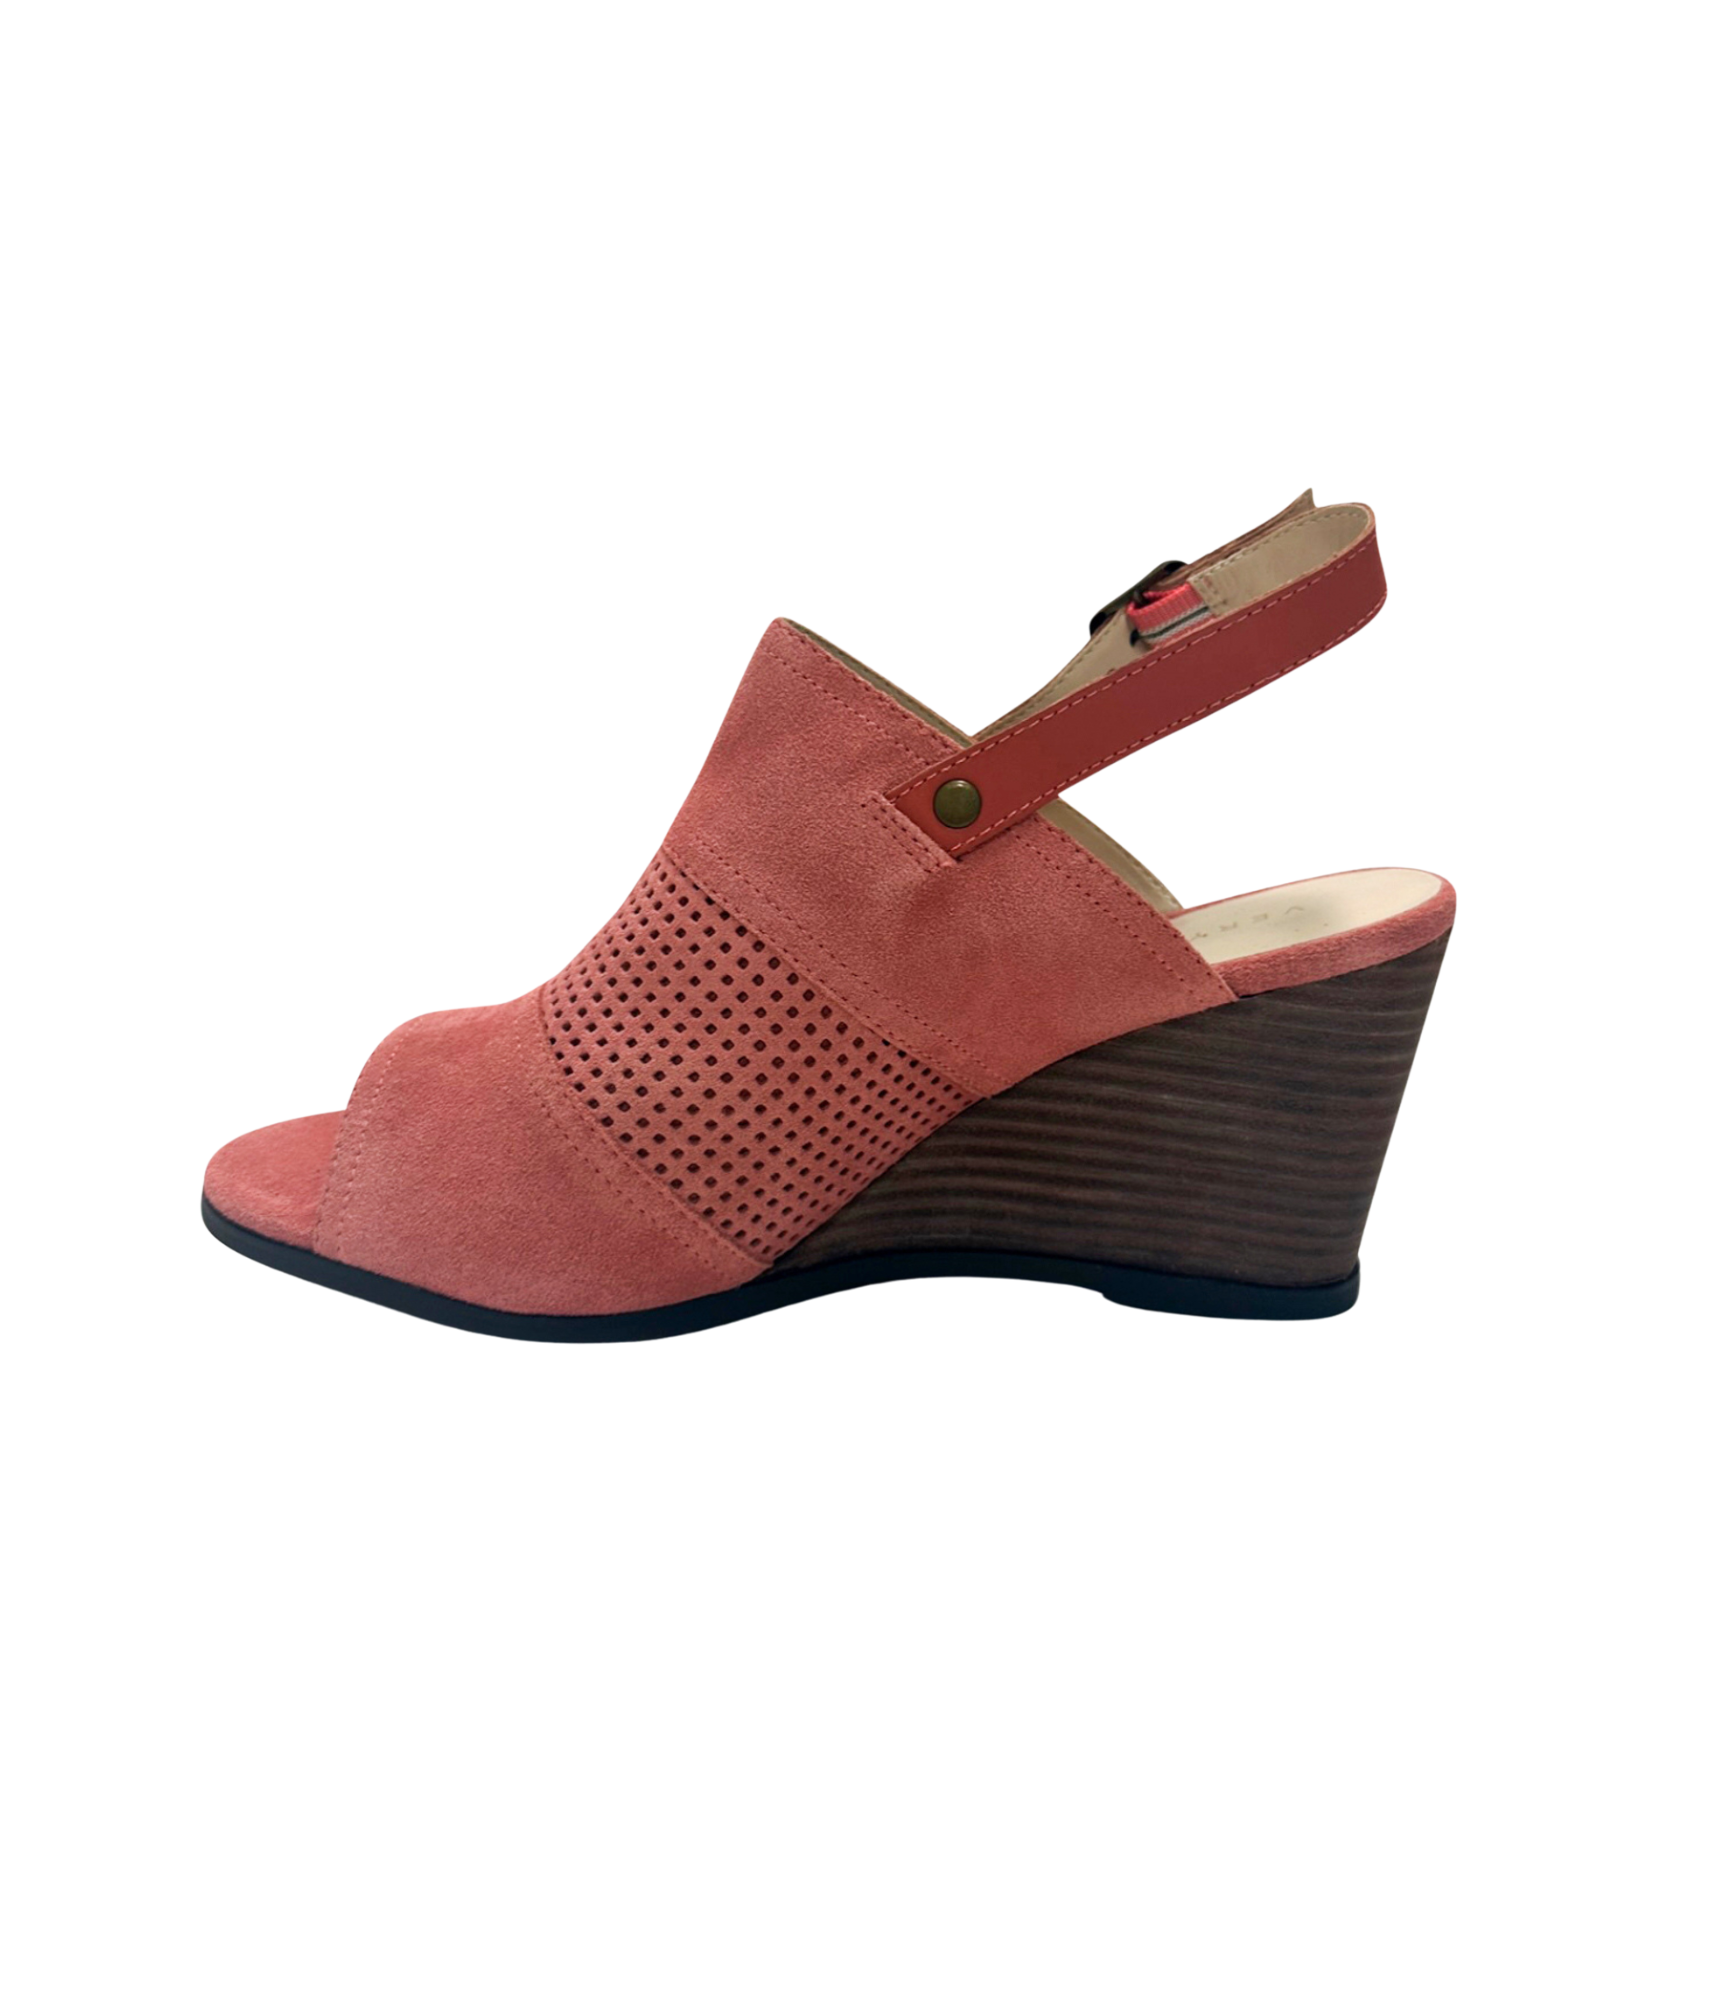 Hyde Wedges in Coral